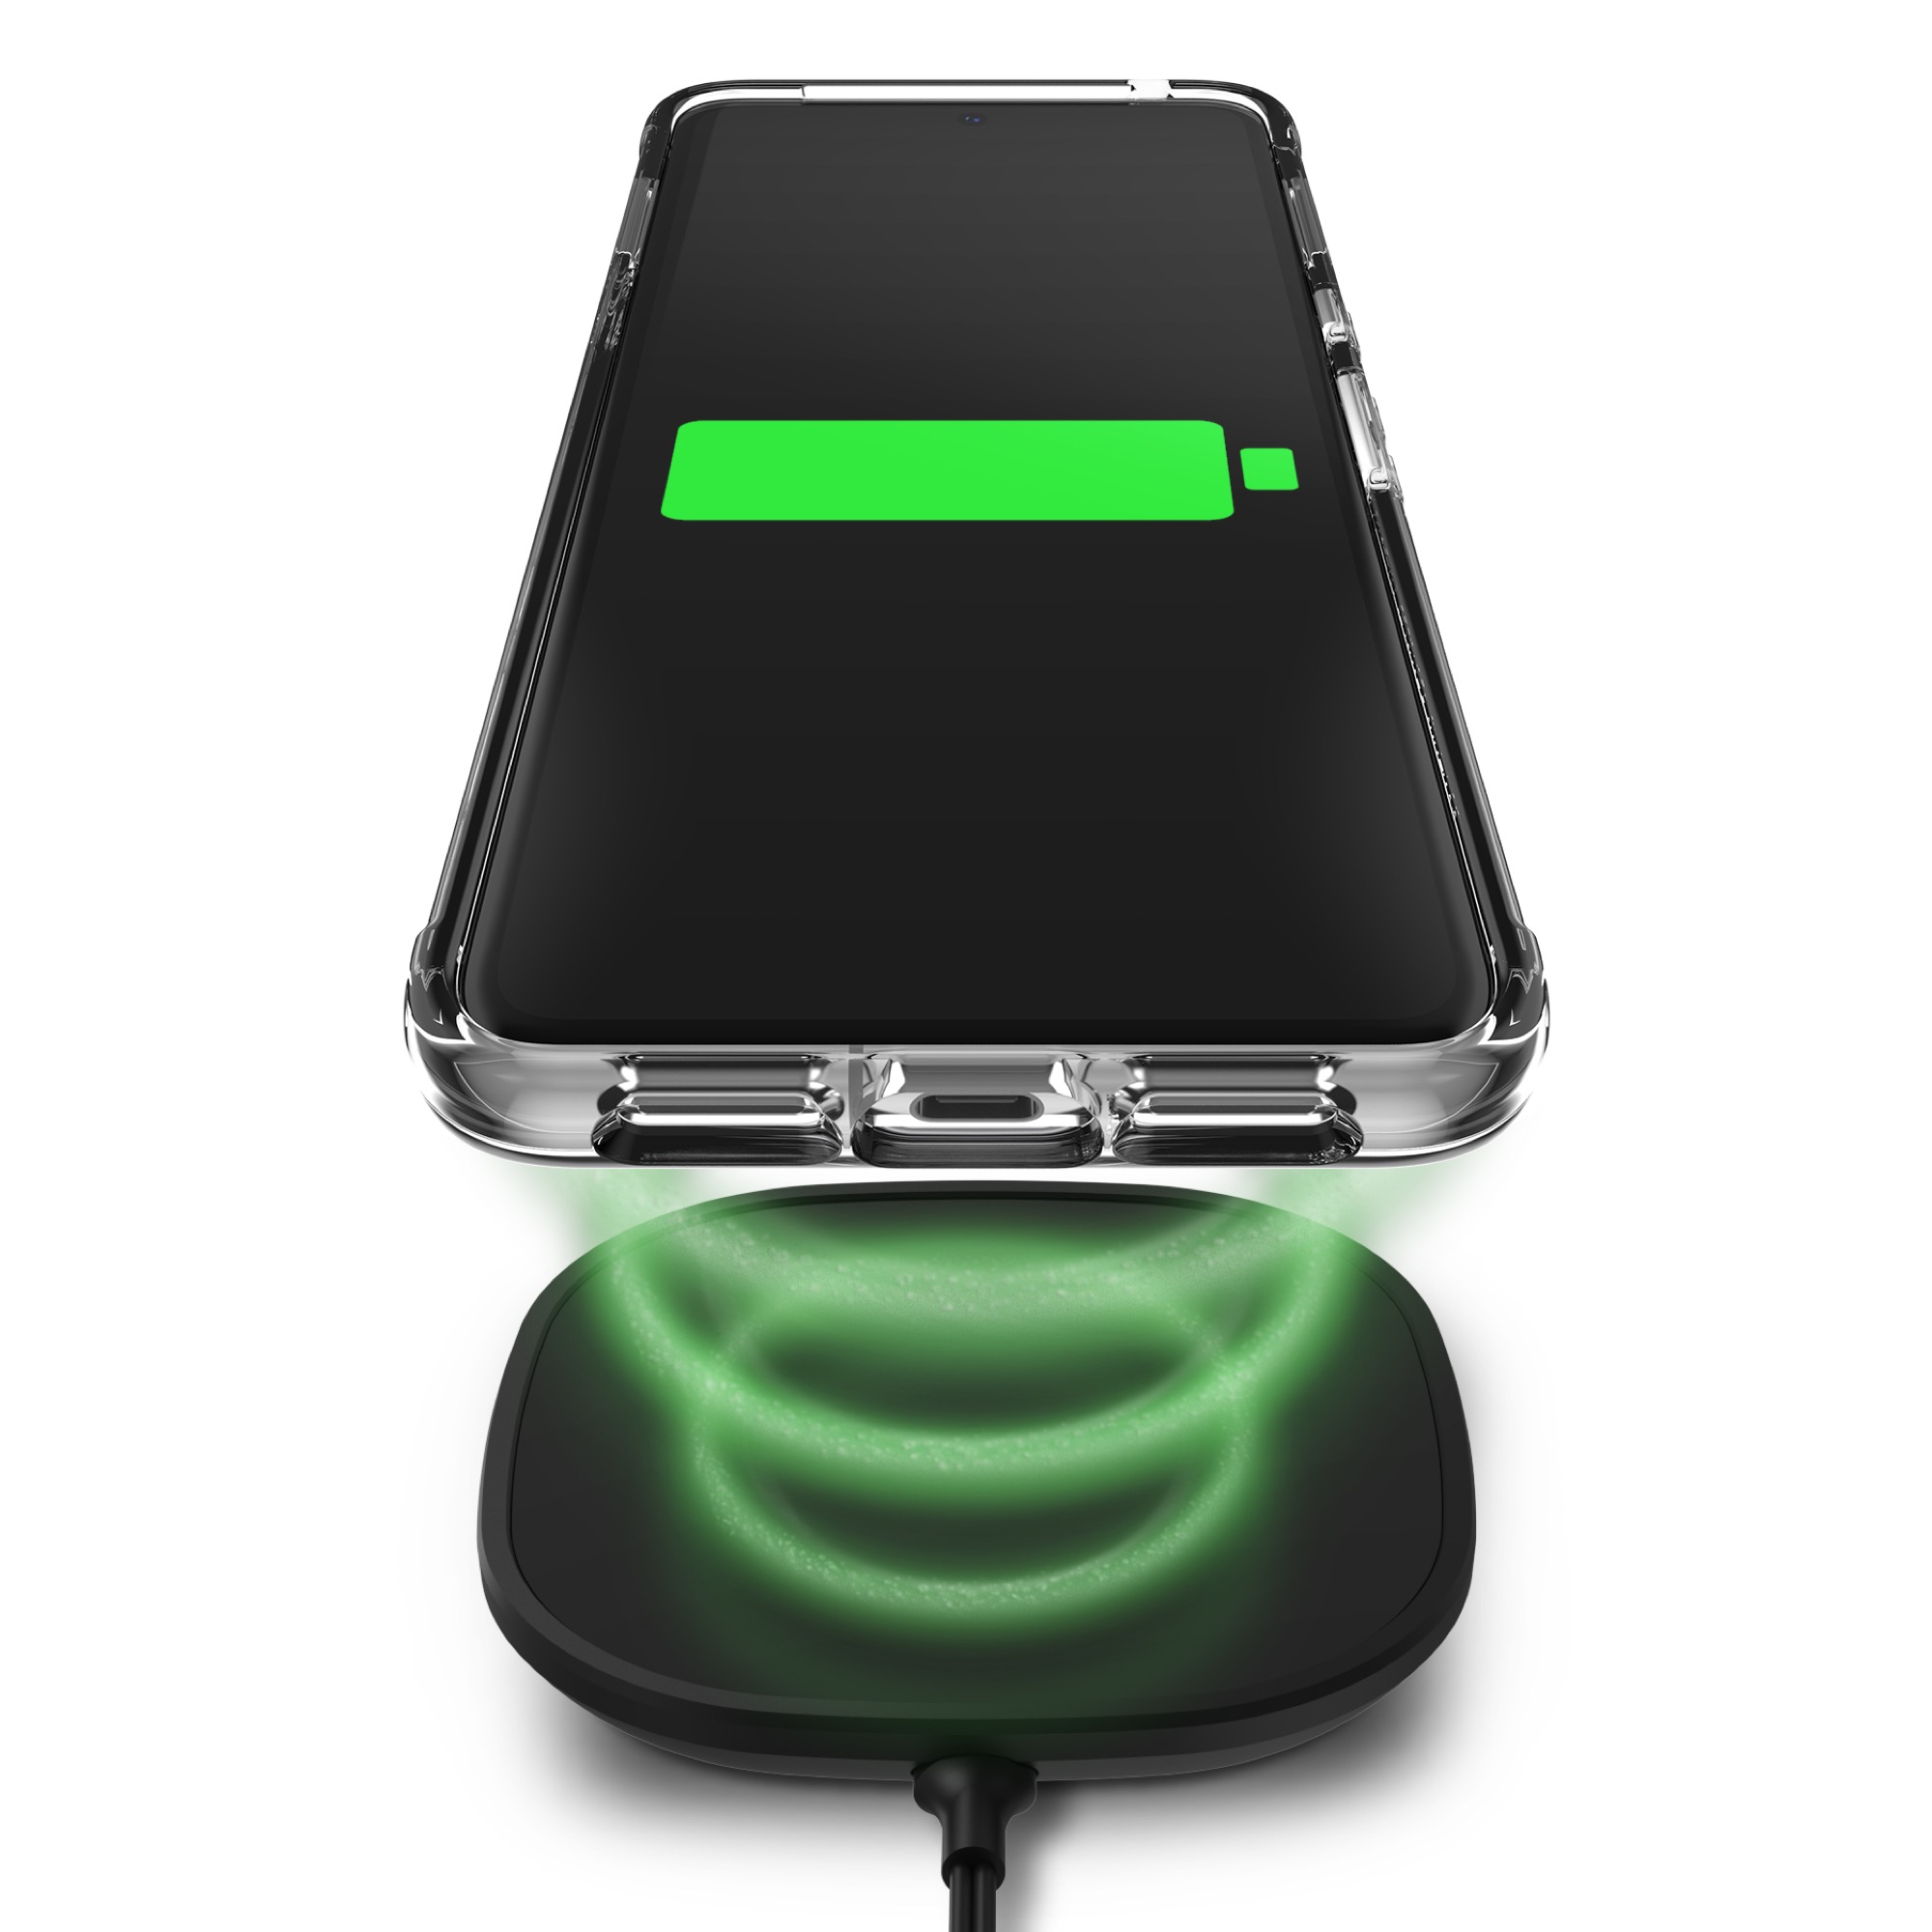 Wireless Charging Compatible||The Luxe case is compatible with most wireless chargers including MagSafe.